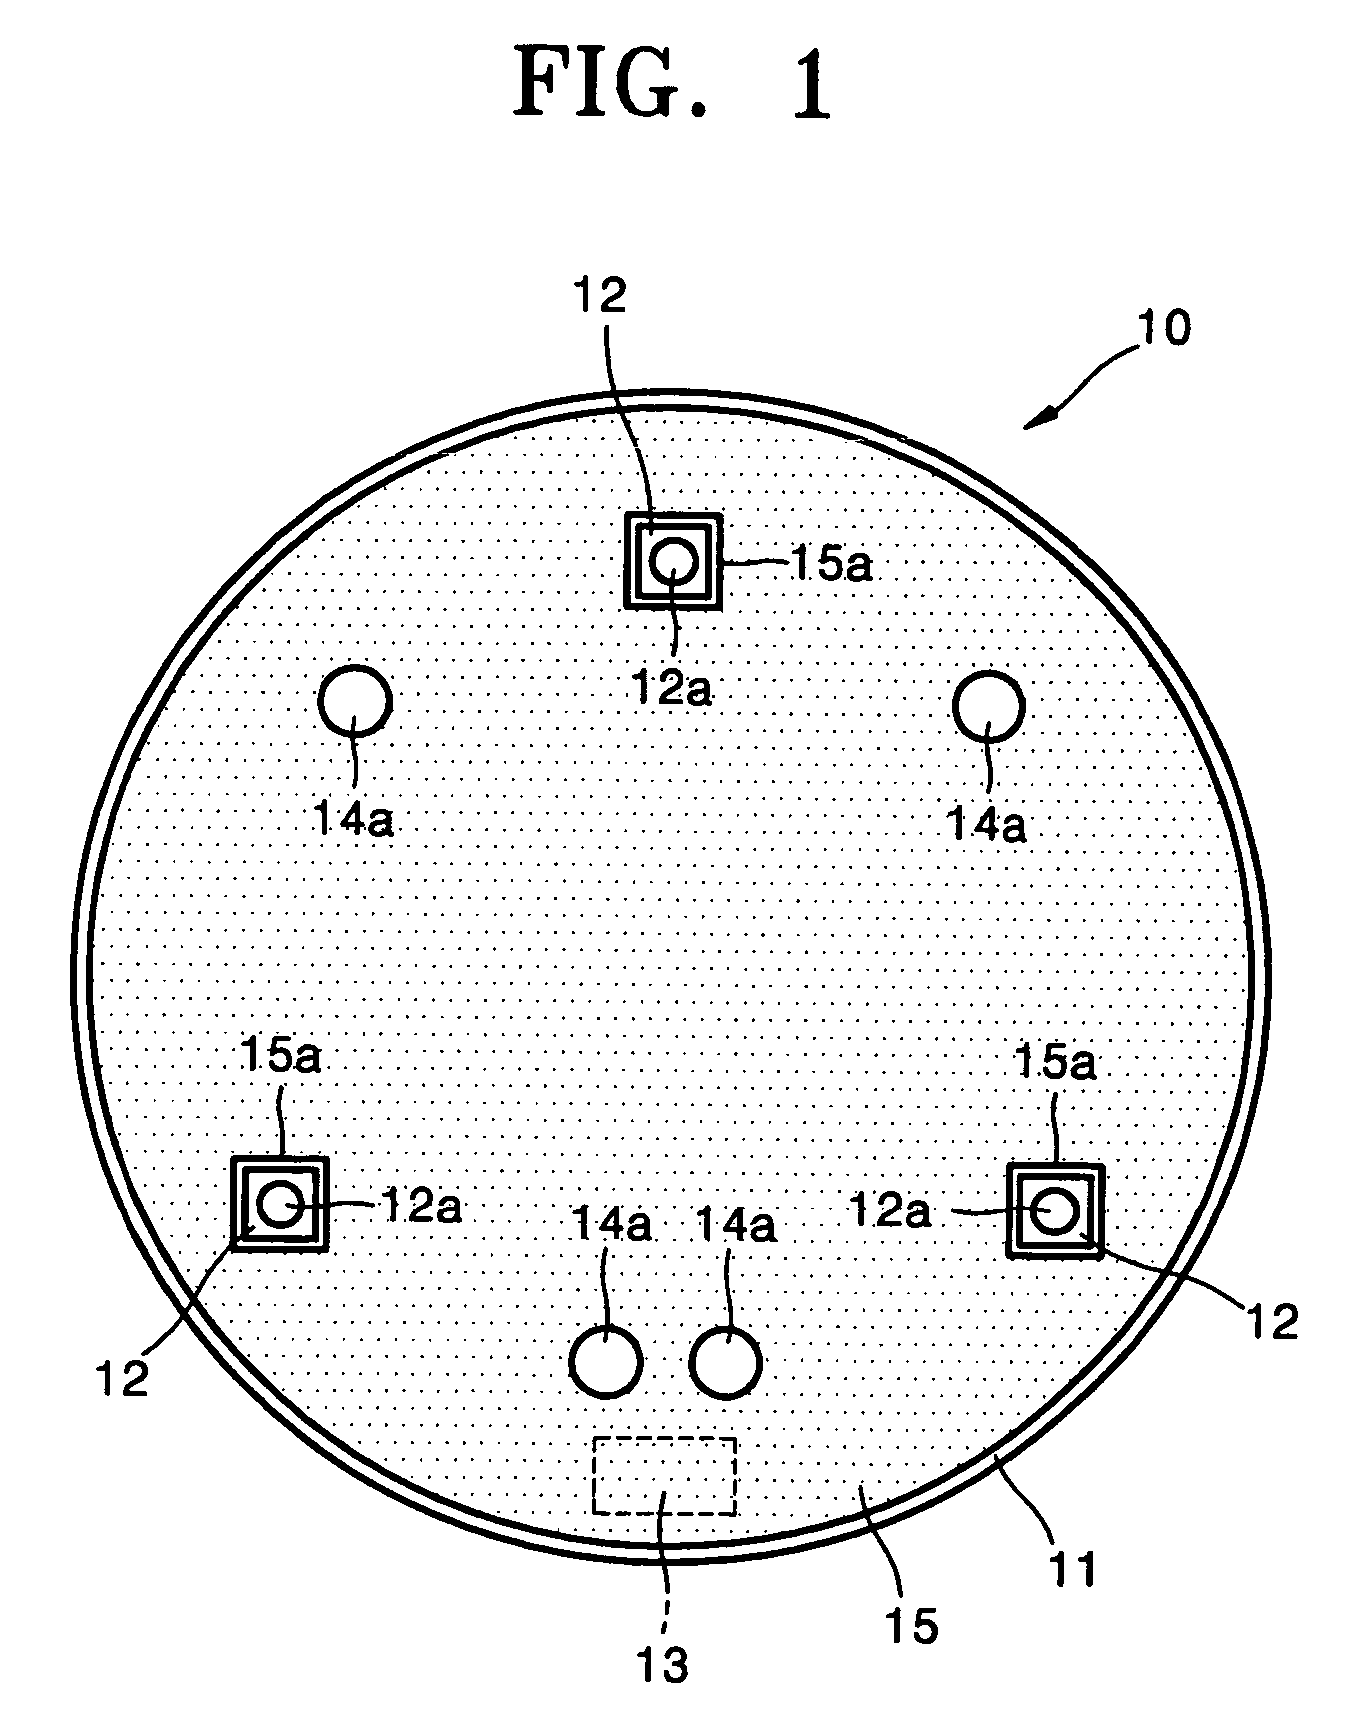 Body surface bio-potential sensor having multiple electrodes and apparatus including the same